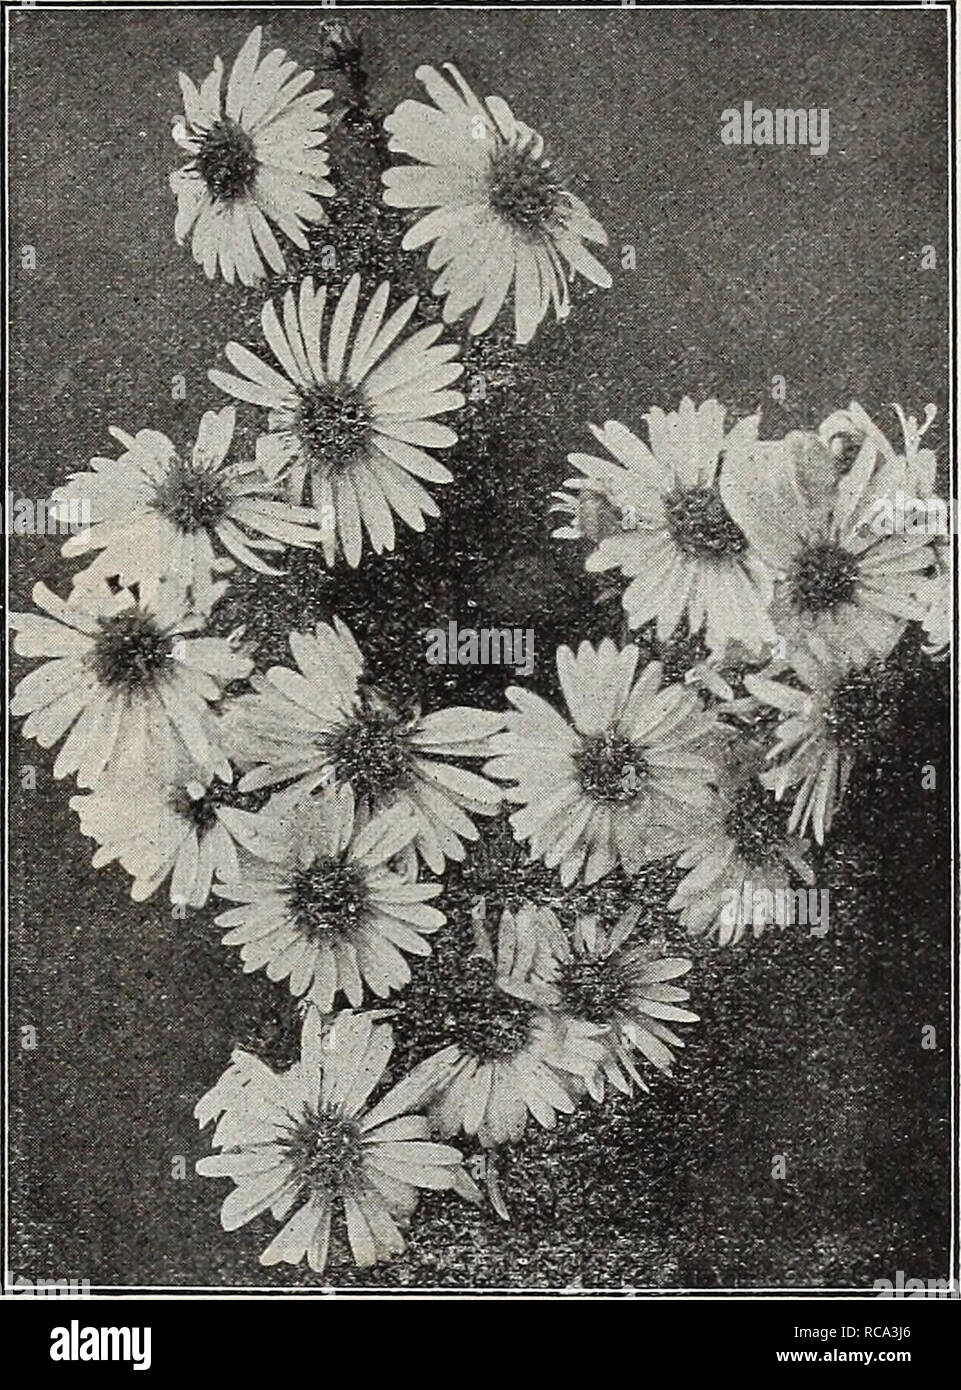 . Dreer's garden book 1919. Seeds Catalogs; Nursery stock Catalogs; Gardening Equipment and supplies Catalogs; Flowers Seeds Catalogs; Vegetables Seeds Catalogs; Fruit Seeds Catalogs. Aster Amellus New Hardy Aster Novi Belgii Climax FAI^I.-FI.O'WERIIVG HARDY ASTERS (Michaelmas Daisies, or Starworts) These are among the showiest of our late-flowering hardy plants, giving a wealth of bloom during September and October, a season when most other hardy flowers are past, and for the best effect should be planted in masses of one color. They grow freely in any soil. The collection offered below is ma Stock Photo